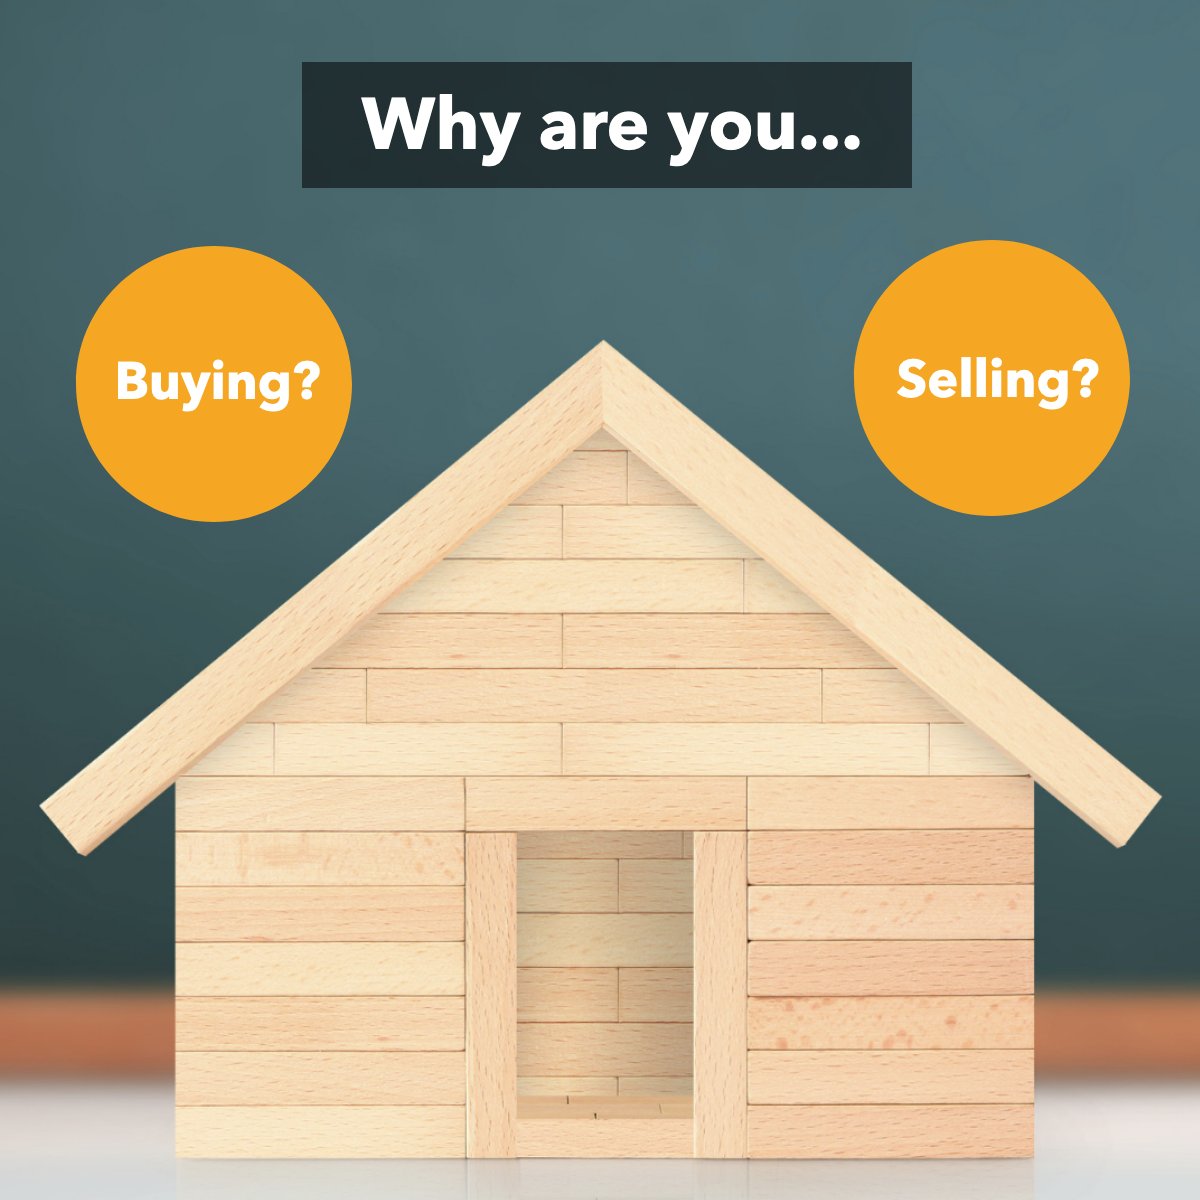 Buying or Selling? 👣 

That is the question. 💭

#buying #selling #buyingorselling #question